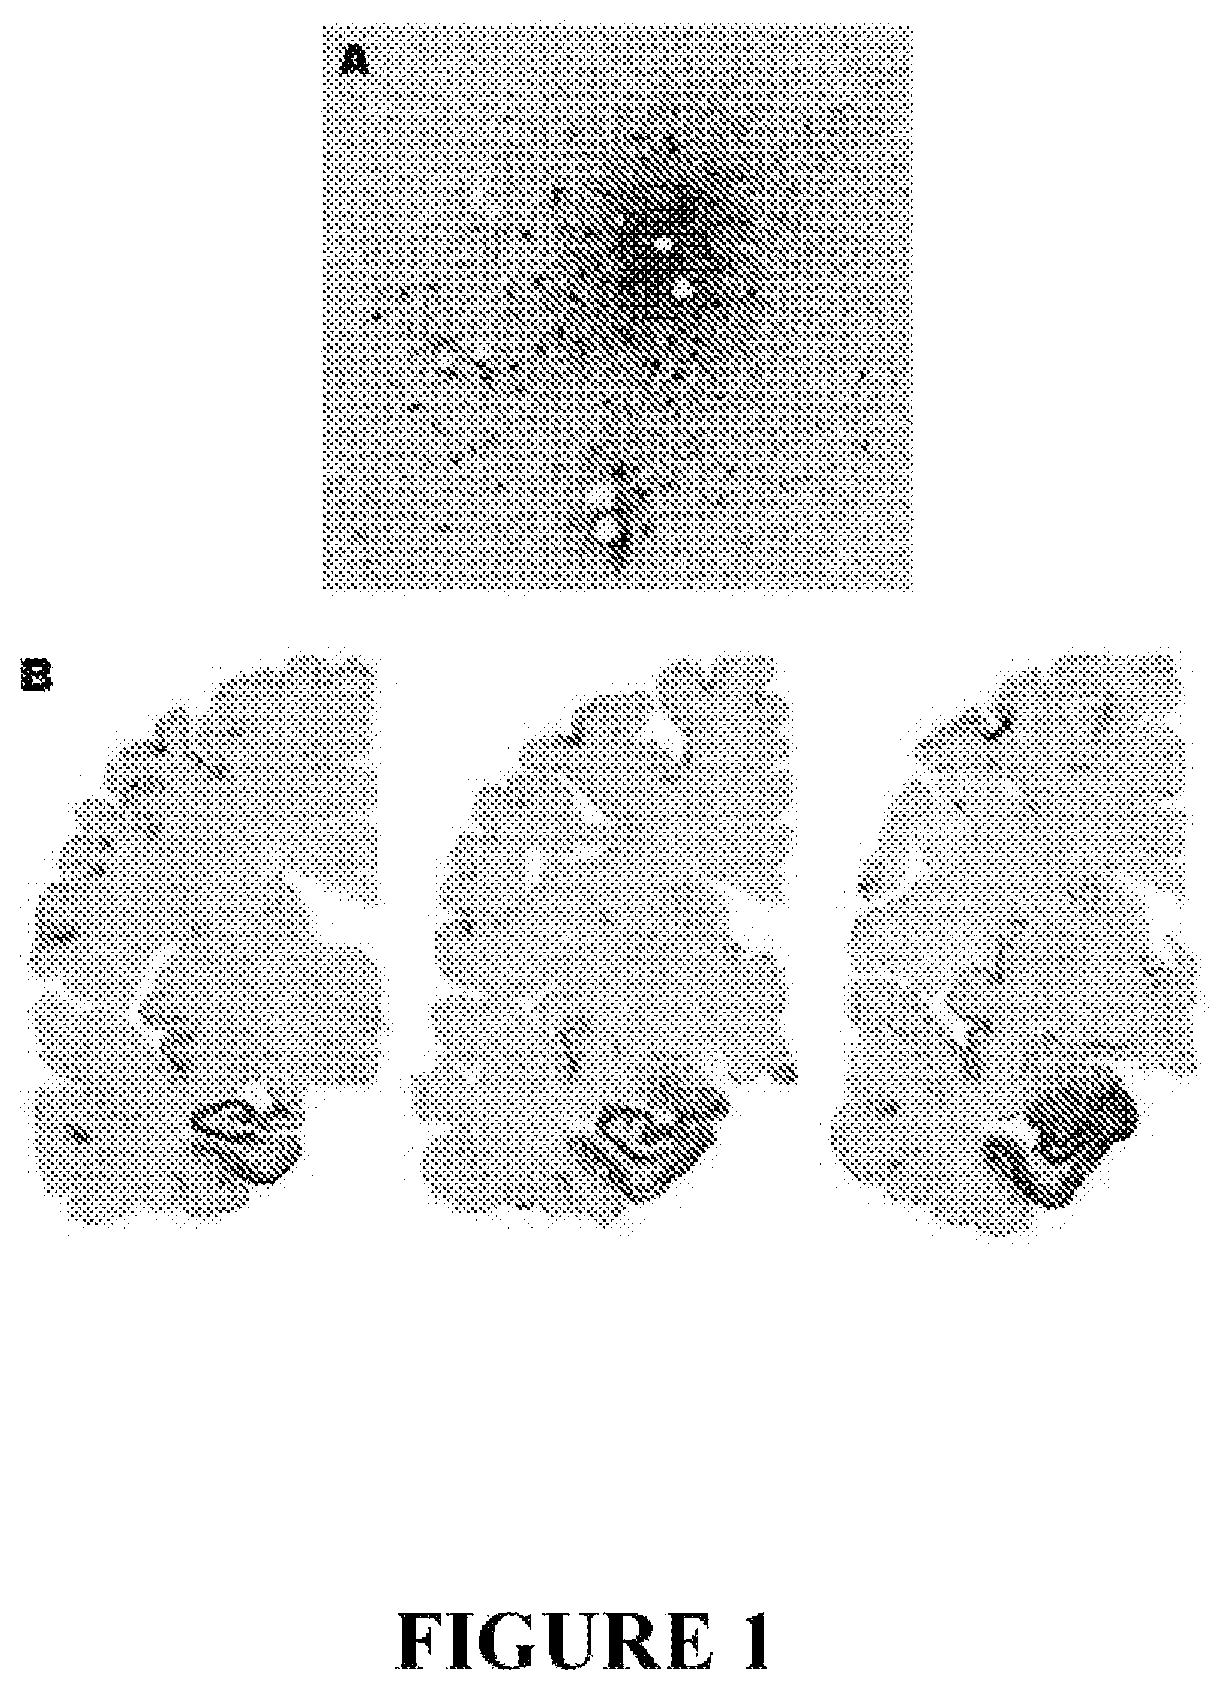 Method for preventing and/or treating chronic traumatic encephalopathy-I